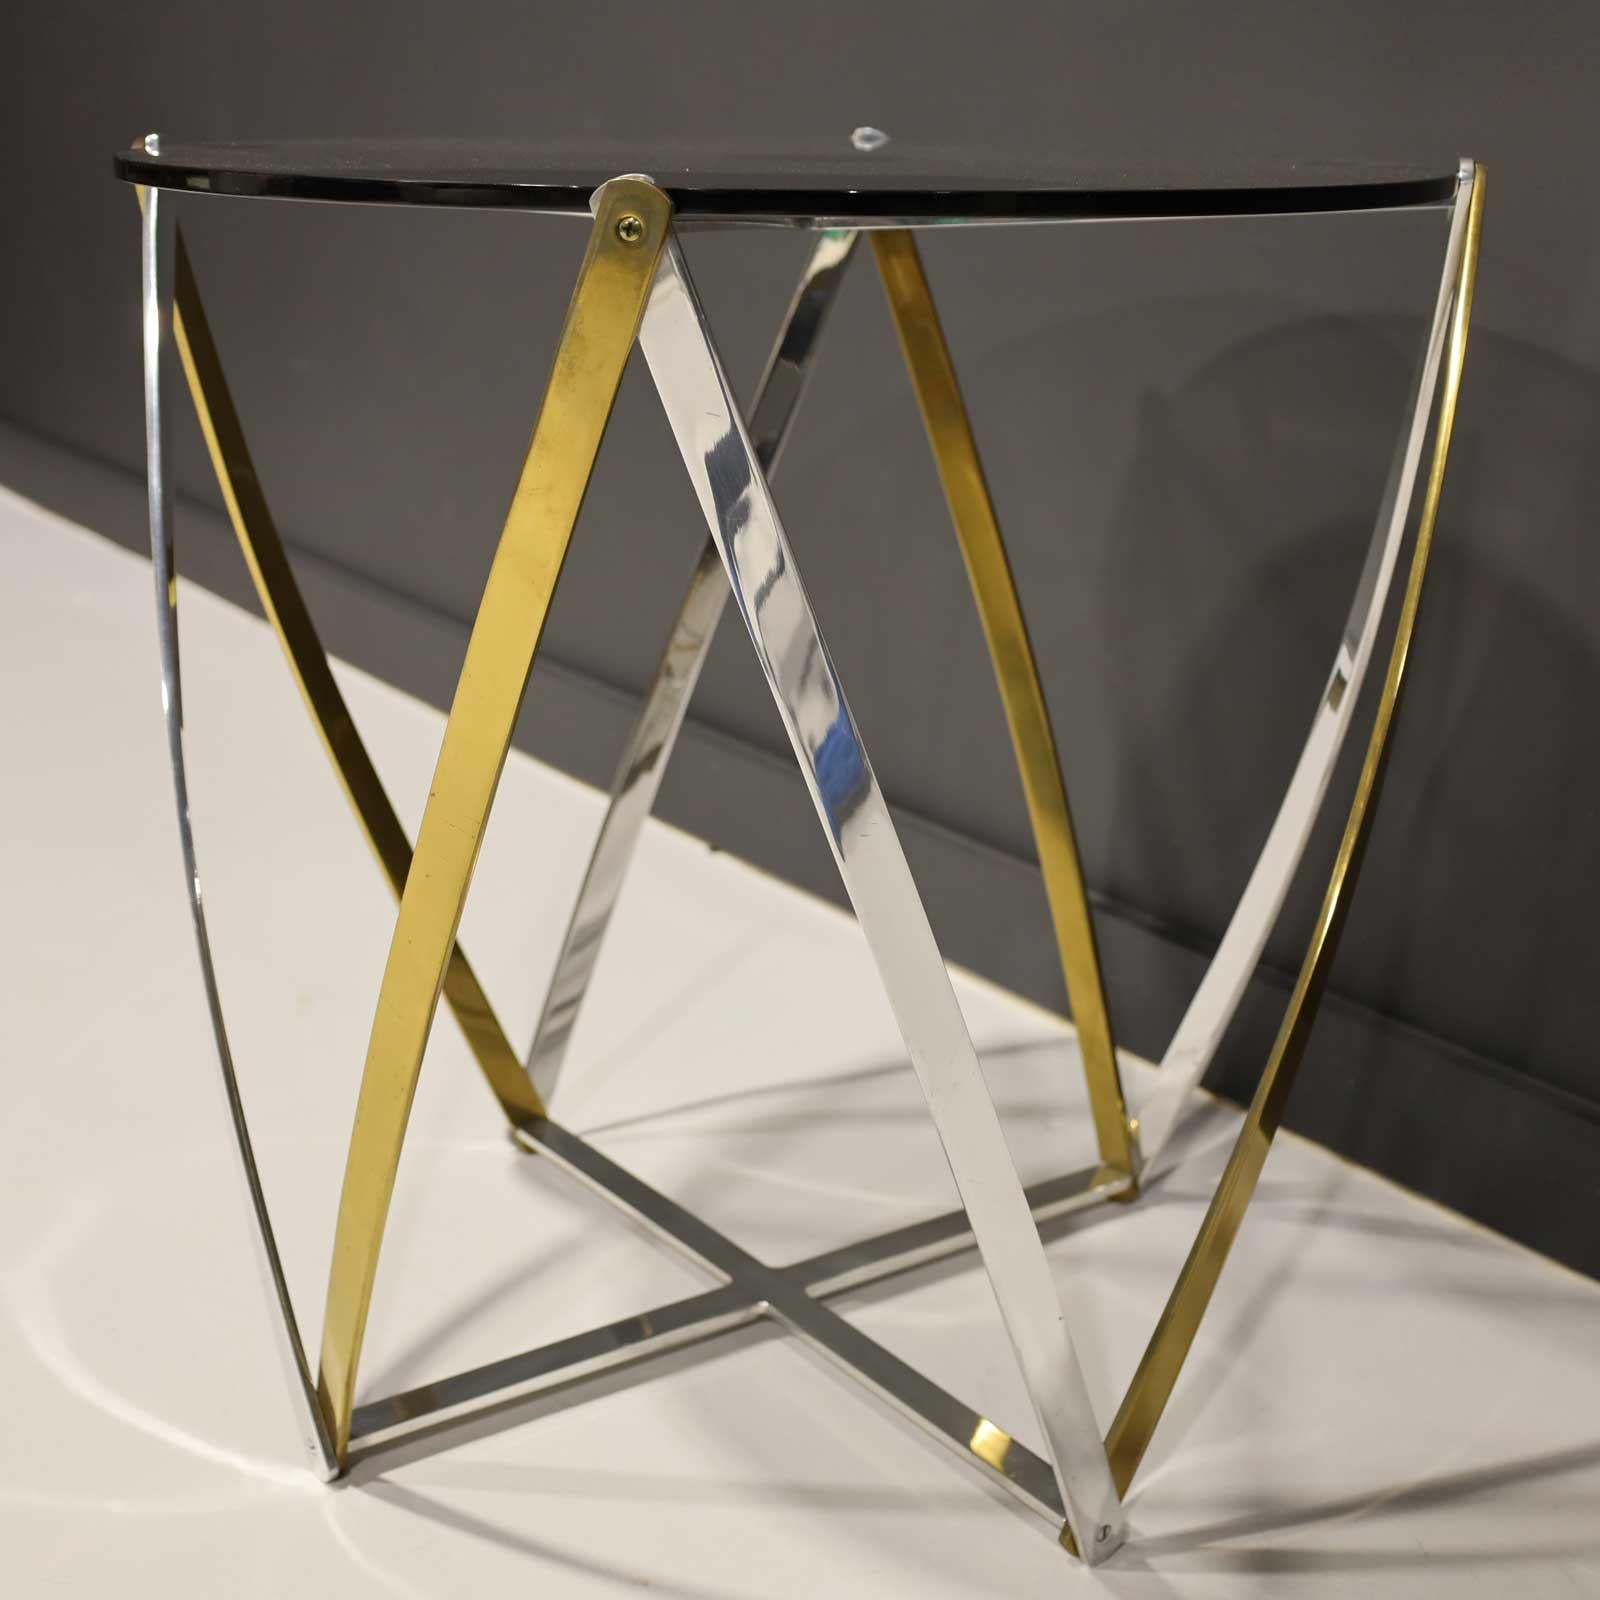 North American John Vesey Brass and Brushed Aluminum End Table 1970s, Smoked Glass Top For Sale